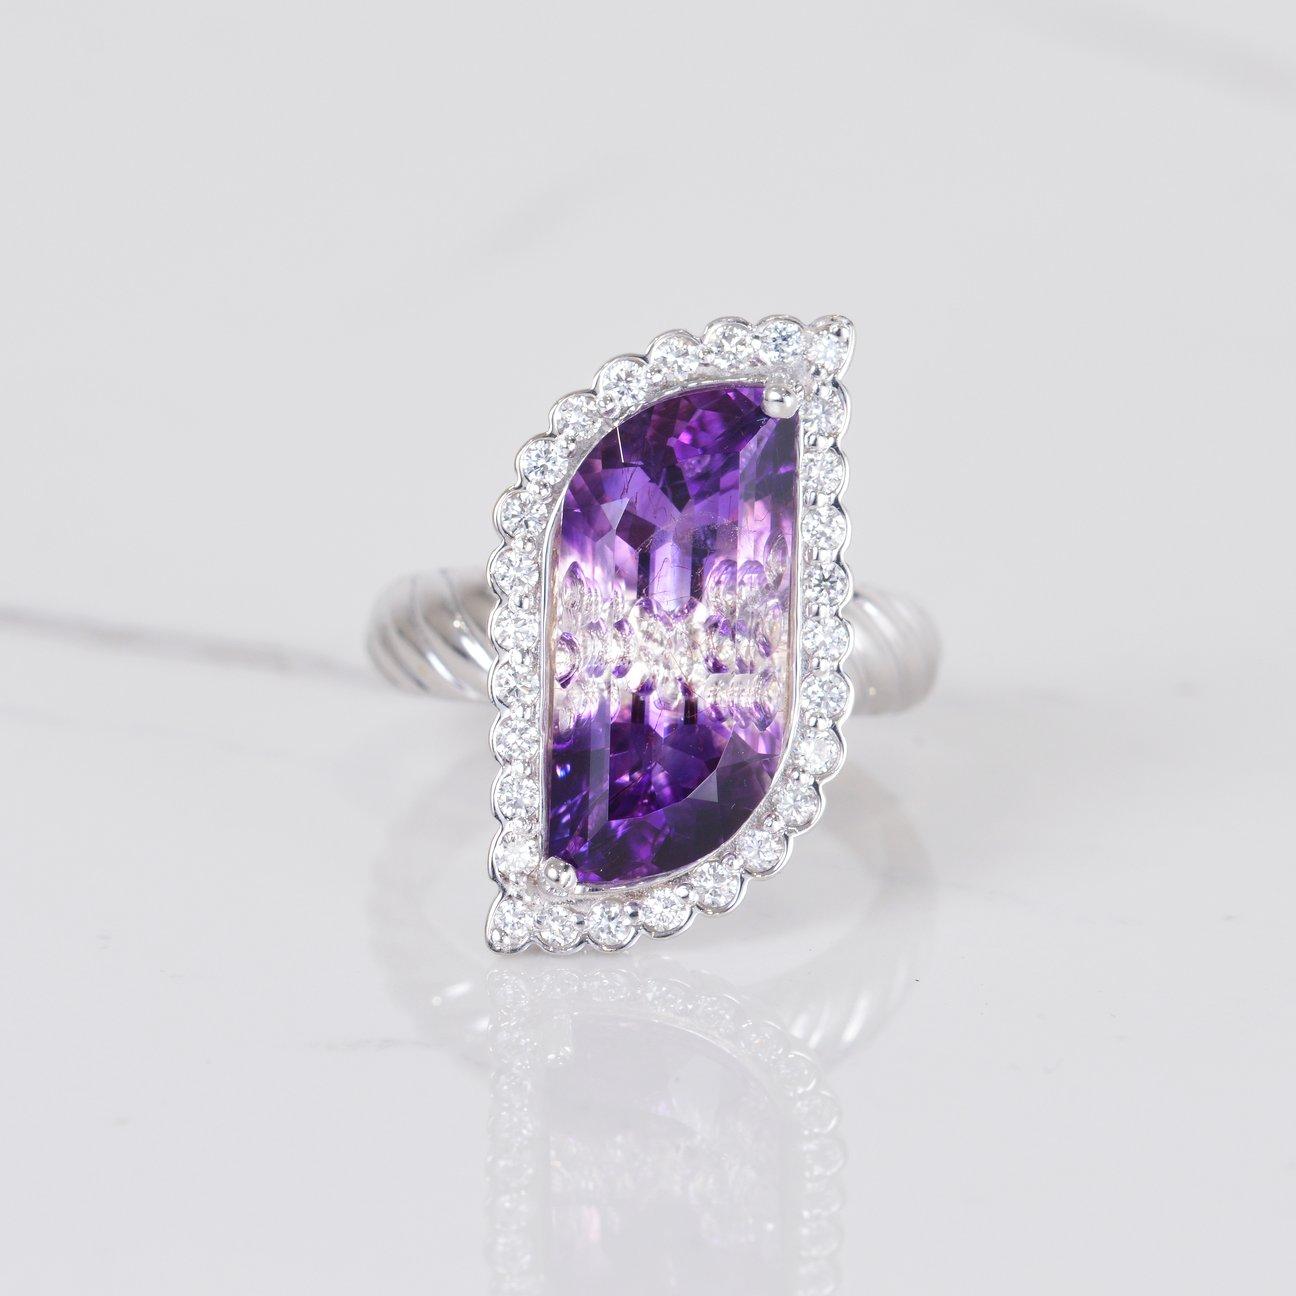 This ring is truly magnificent! The center stone is a unique and gorgeous 5.58 carat bi-color amethyst that was cut by an award winning gemstone cutter here in Arizona. Accenting this one of a kind stone is .44 carats of beautiful diamonds. All set